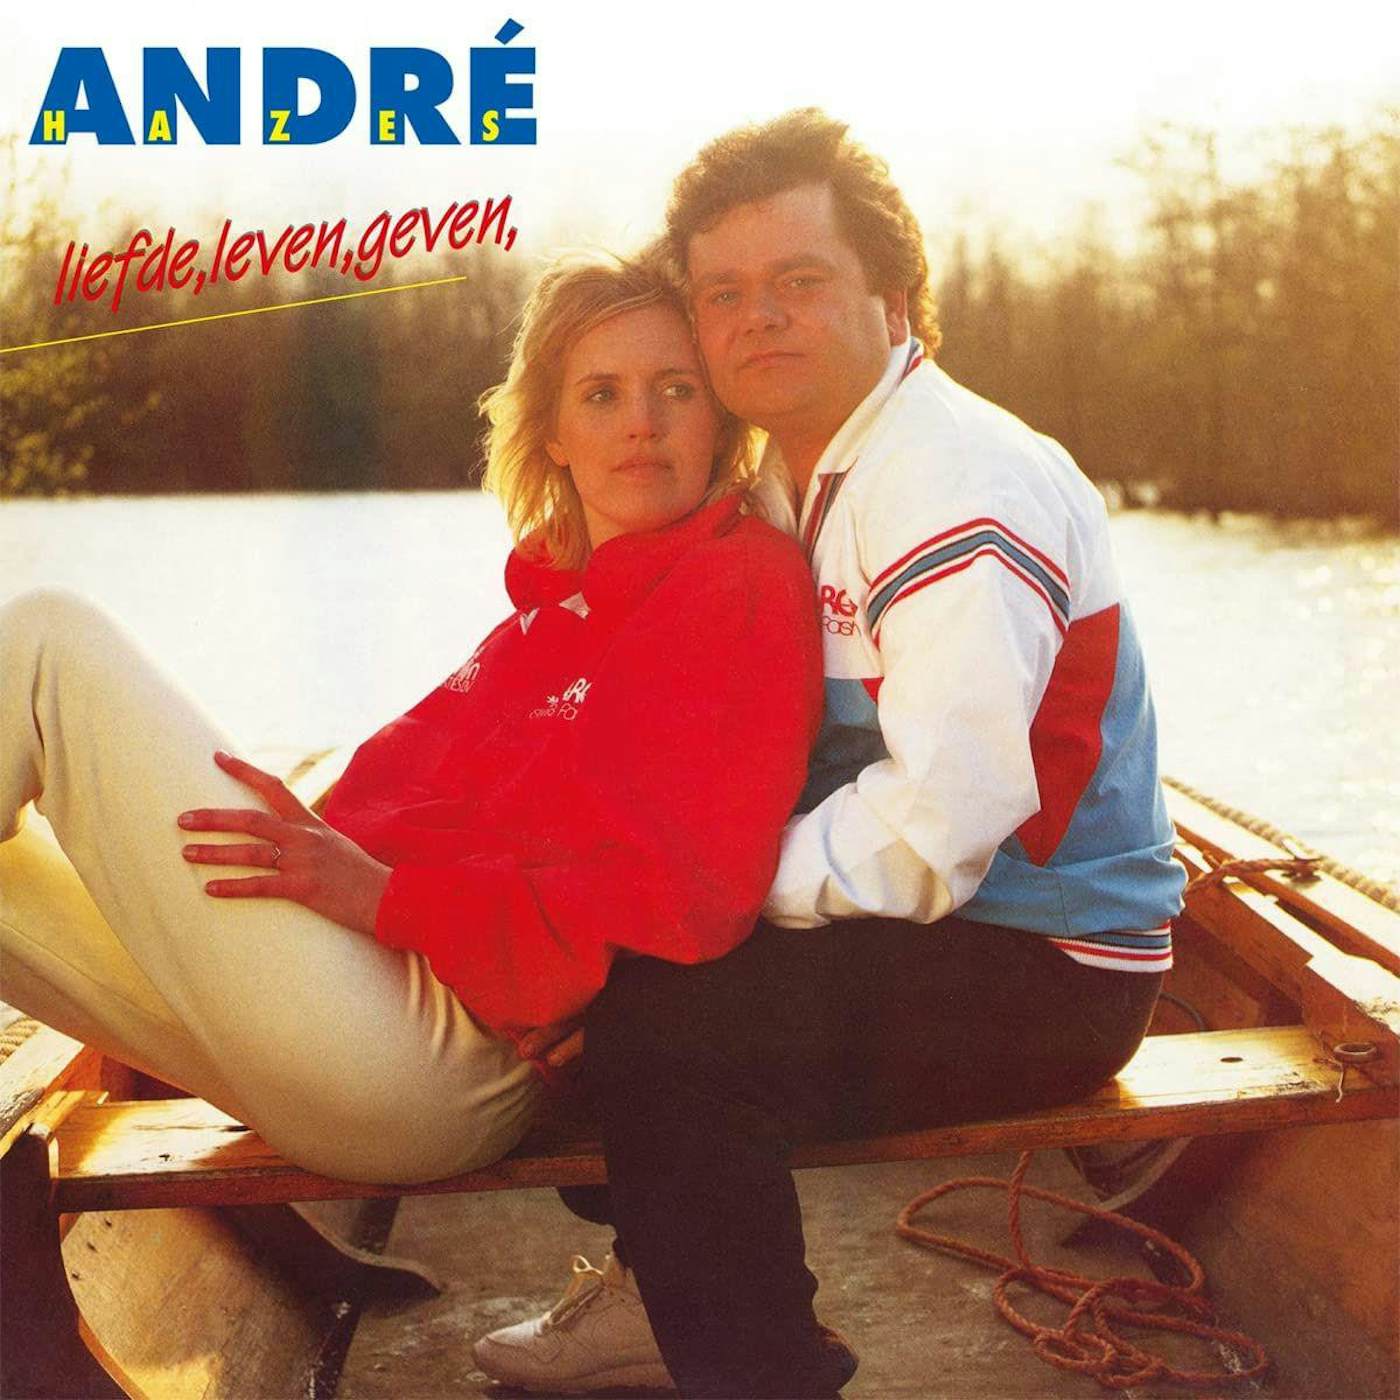 Andre Hazes Liefde Leven Geven (Limited Edition/Clear) Vinyl Record